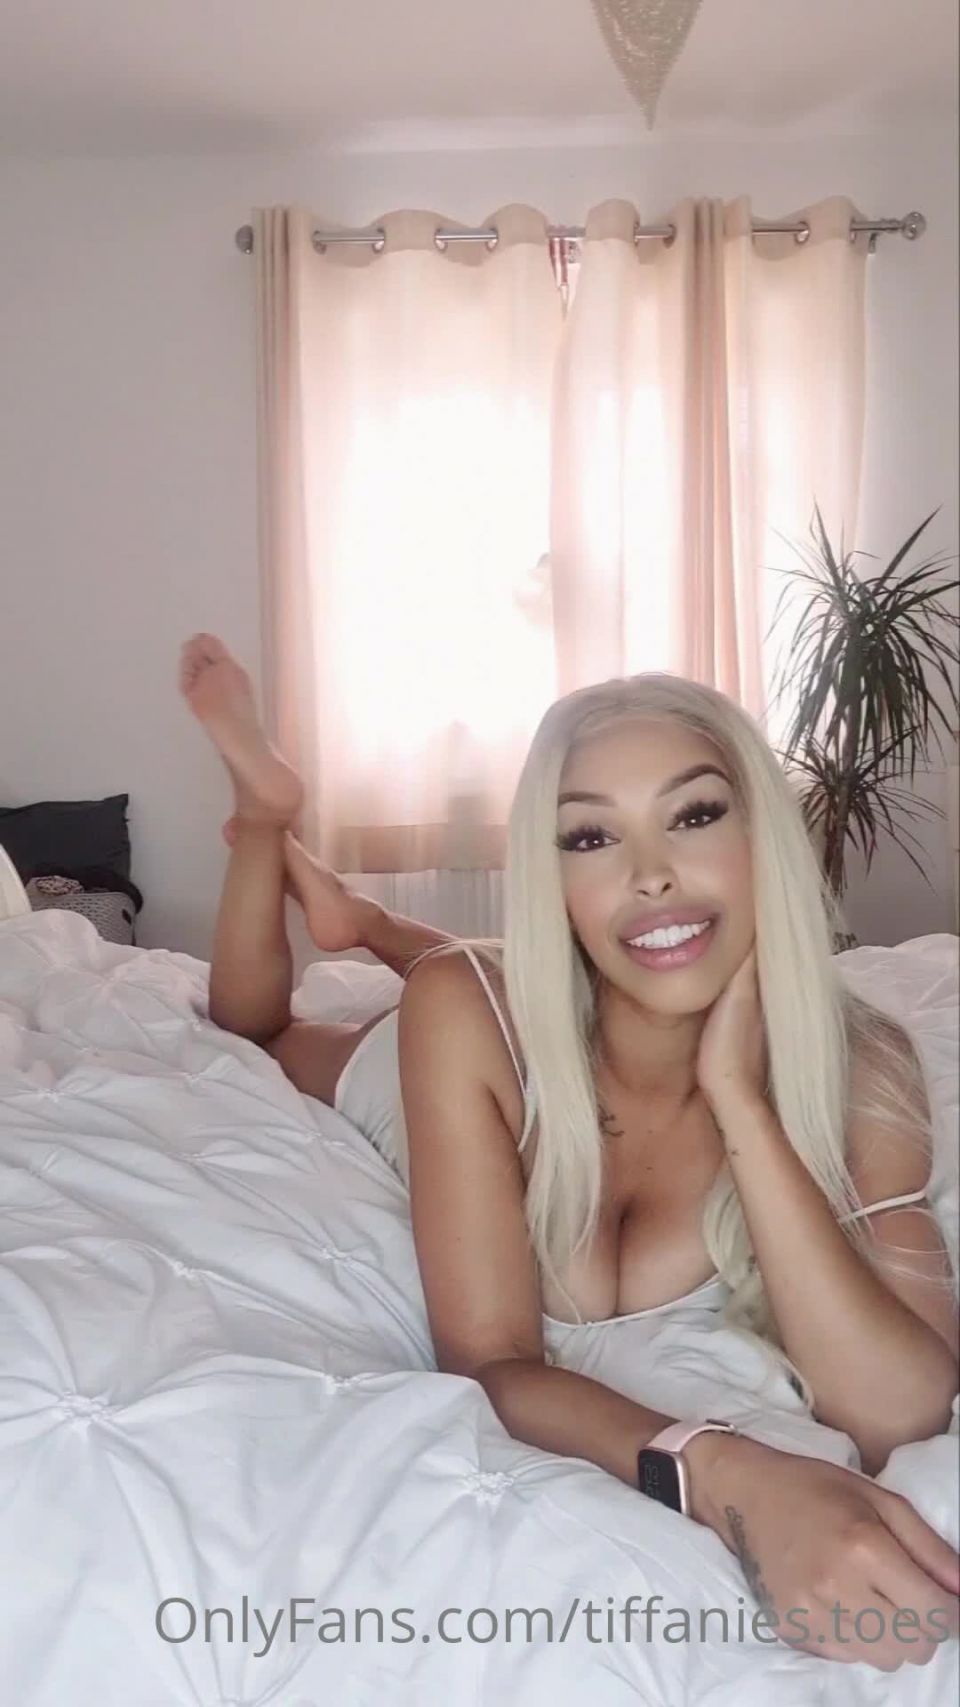 Tiffanie Toes () Tiffaniestoes - lets play a game mins joi with a second countdown so be ready to stroke hard and 23-06-2021